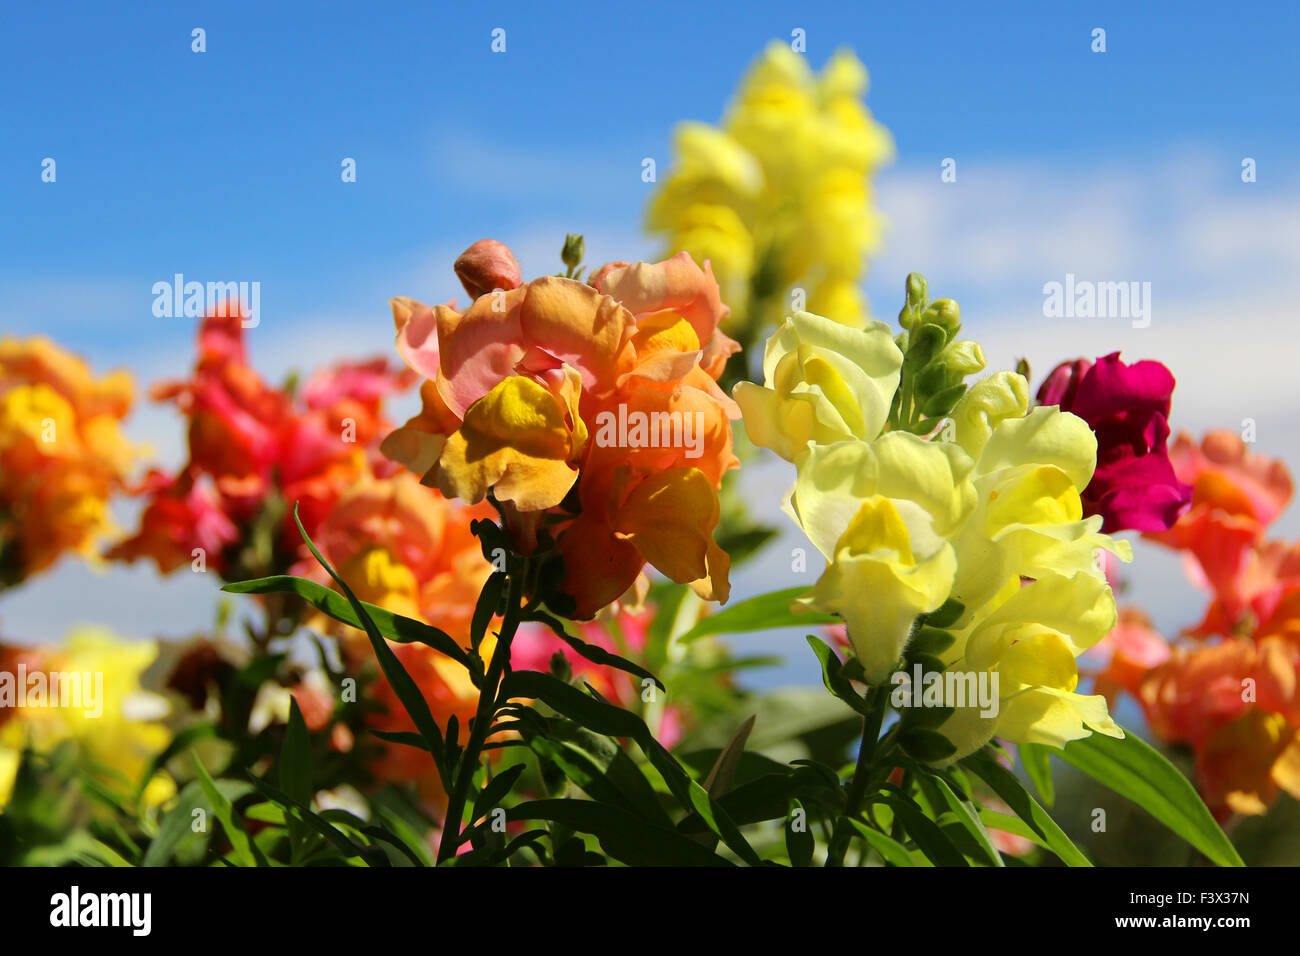 snapdragons,dragon flowers Stock Photo